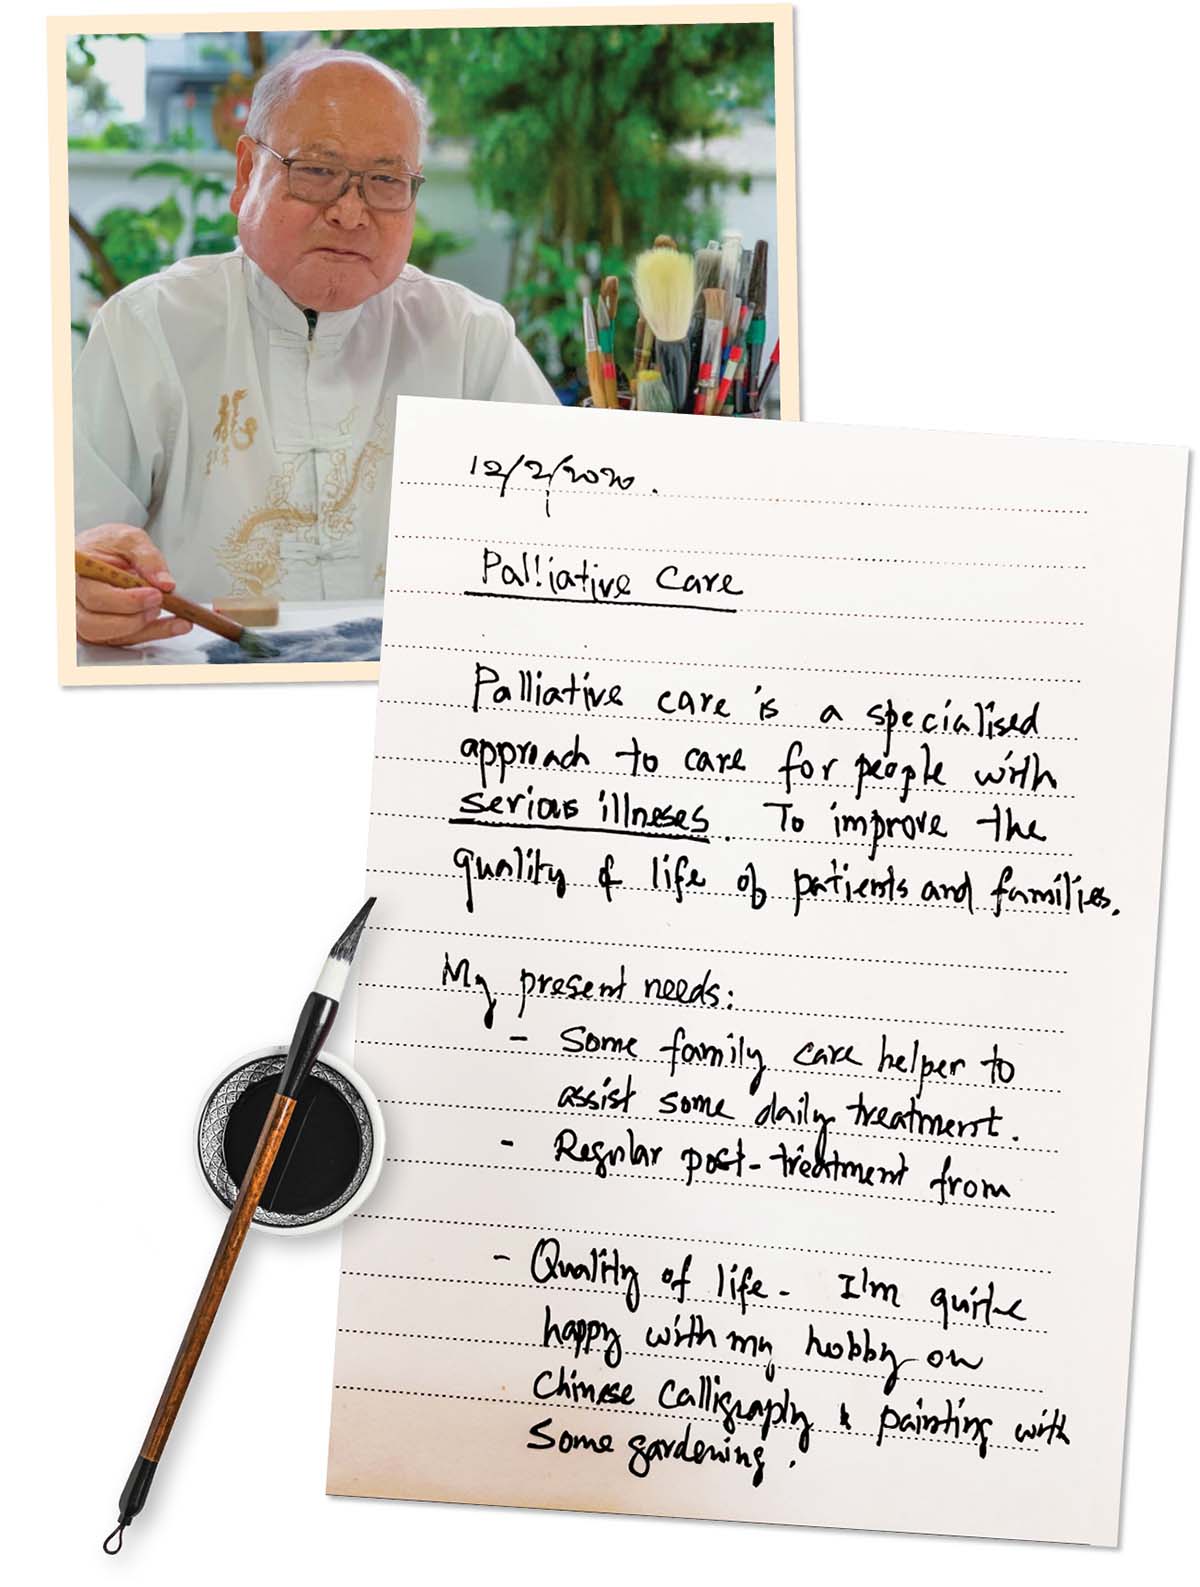 Image of Mr Lee How Son, taken from HCA Hospice’s Instagram page, and Mr Lee How Son’s notes.